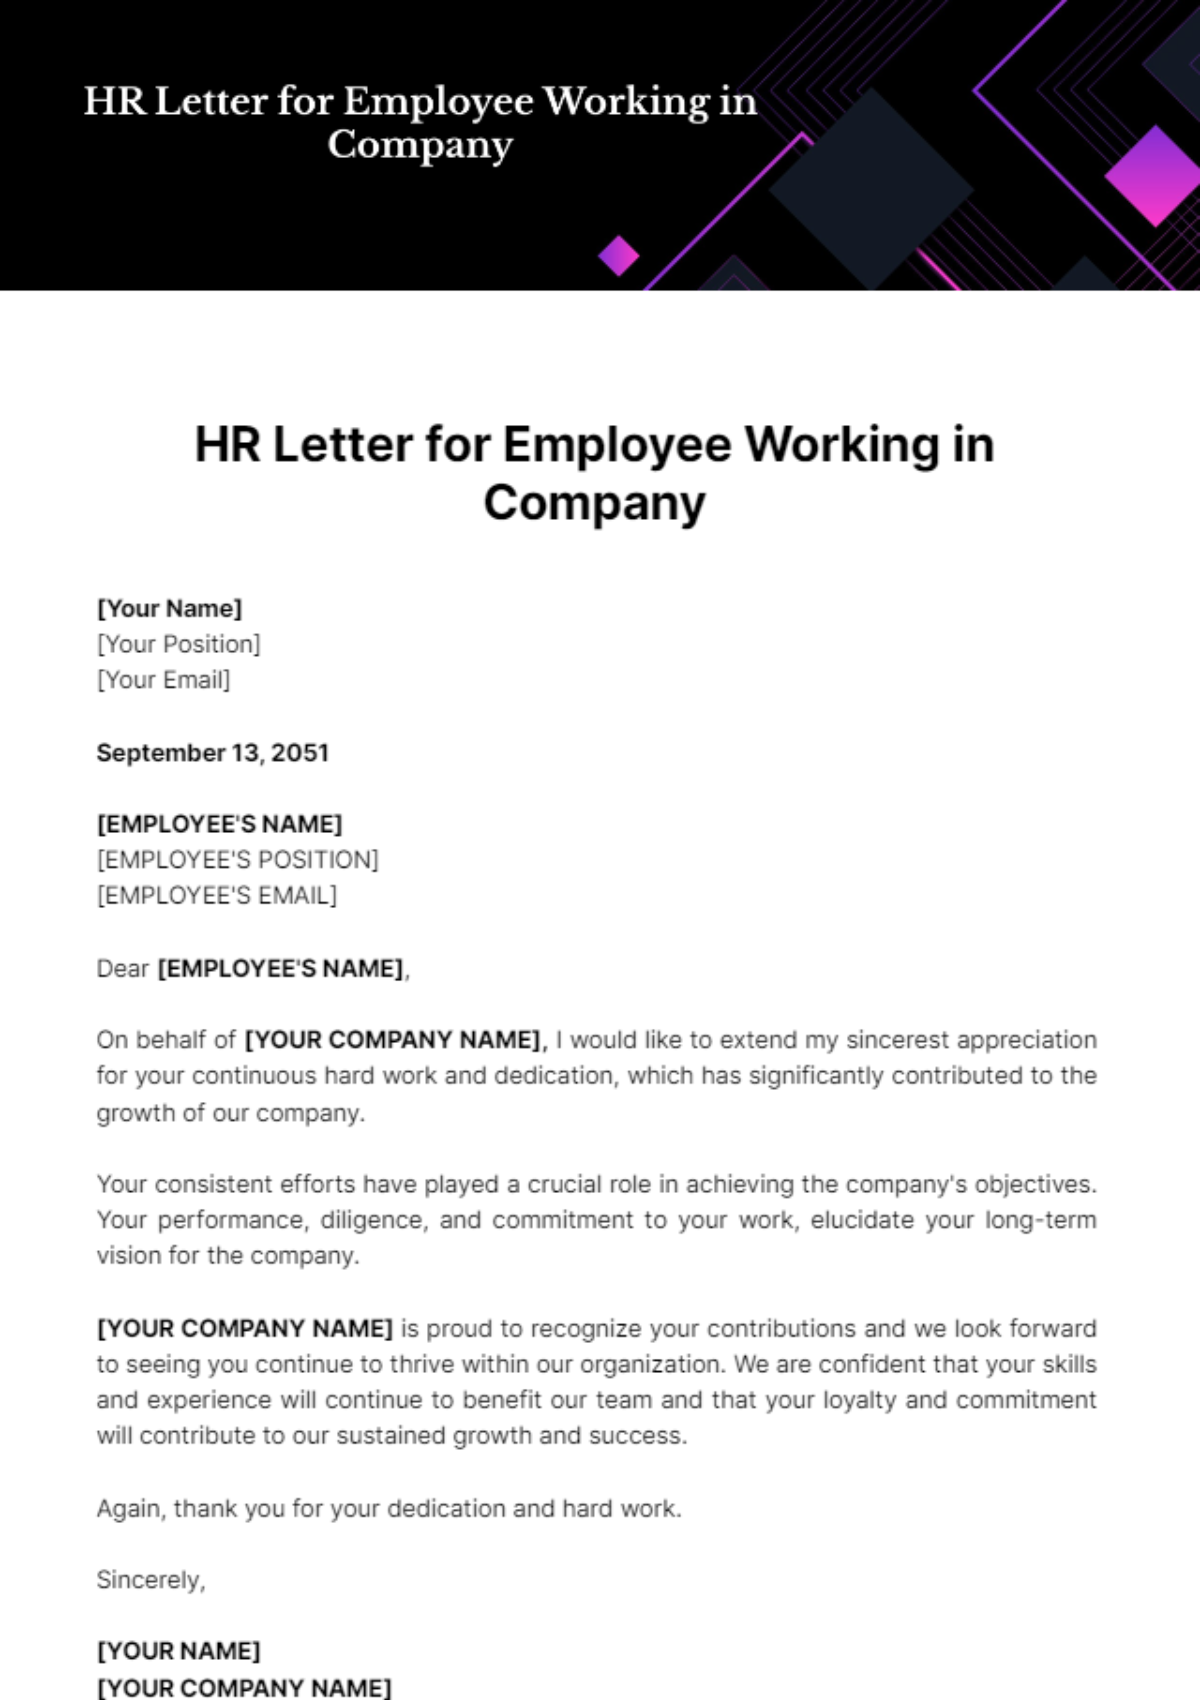 Free HR Letter for Employee Working in Company Template